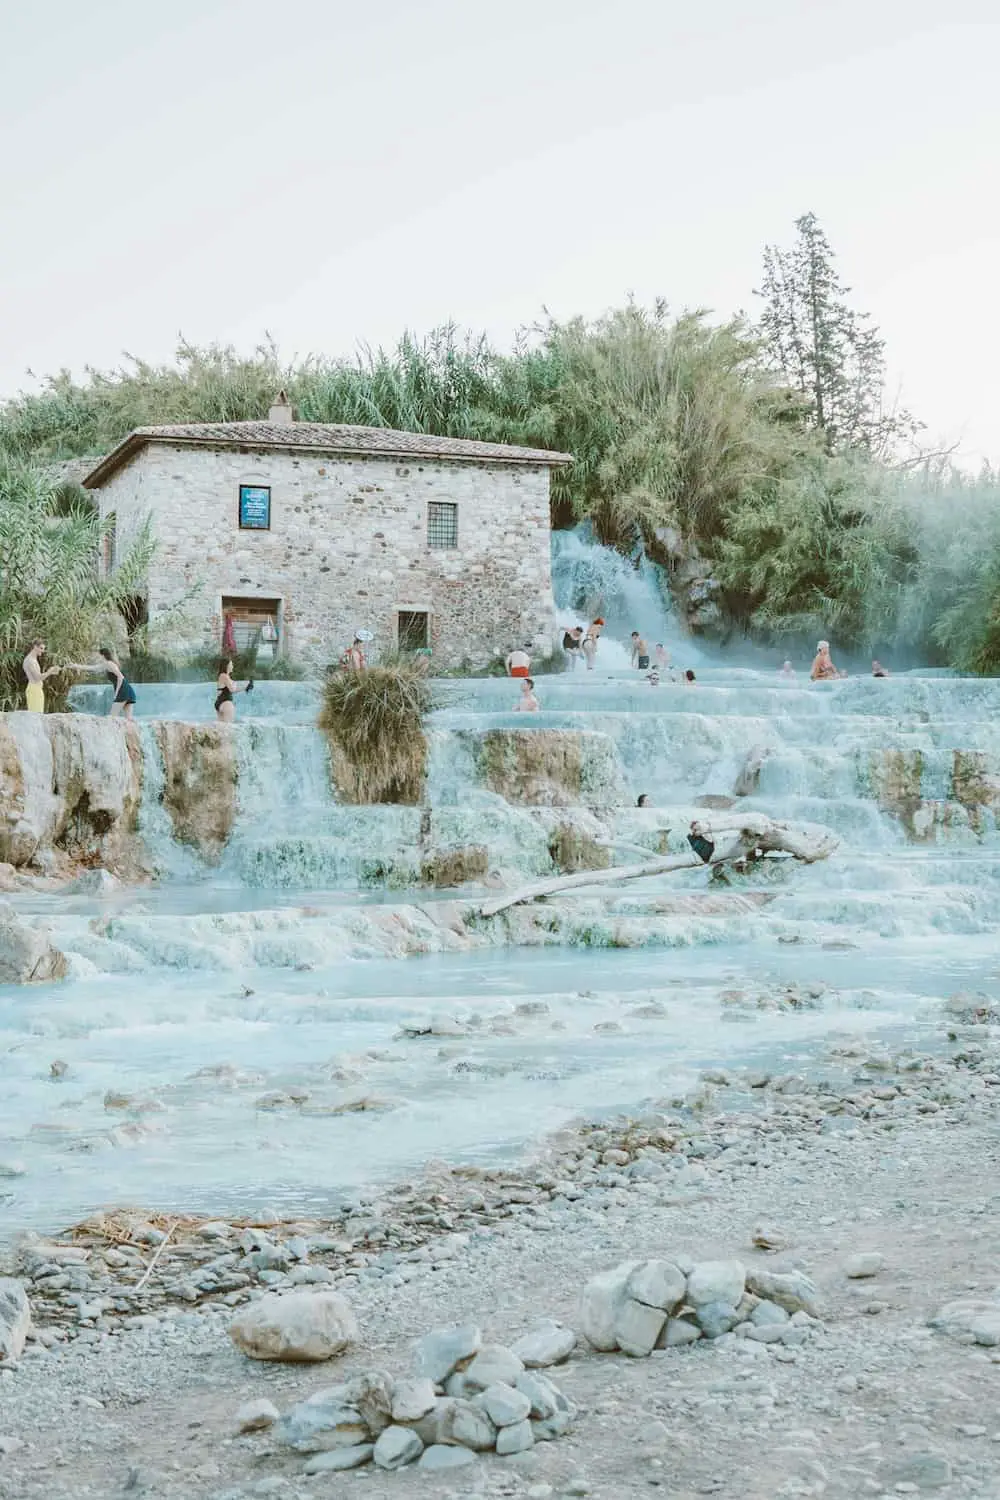 Saturnia Hot Springs: How To Visit These Epic Hot Springs In Tuscany